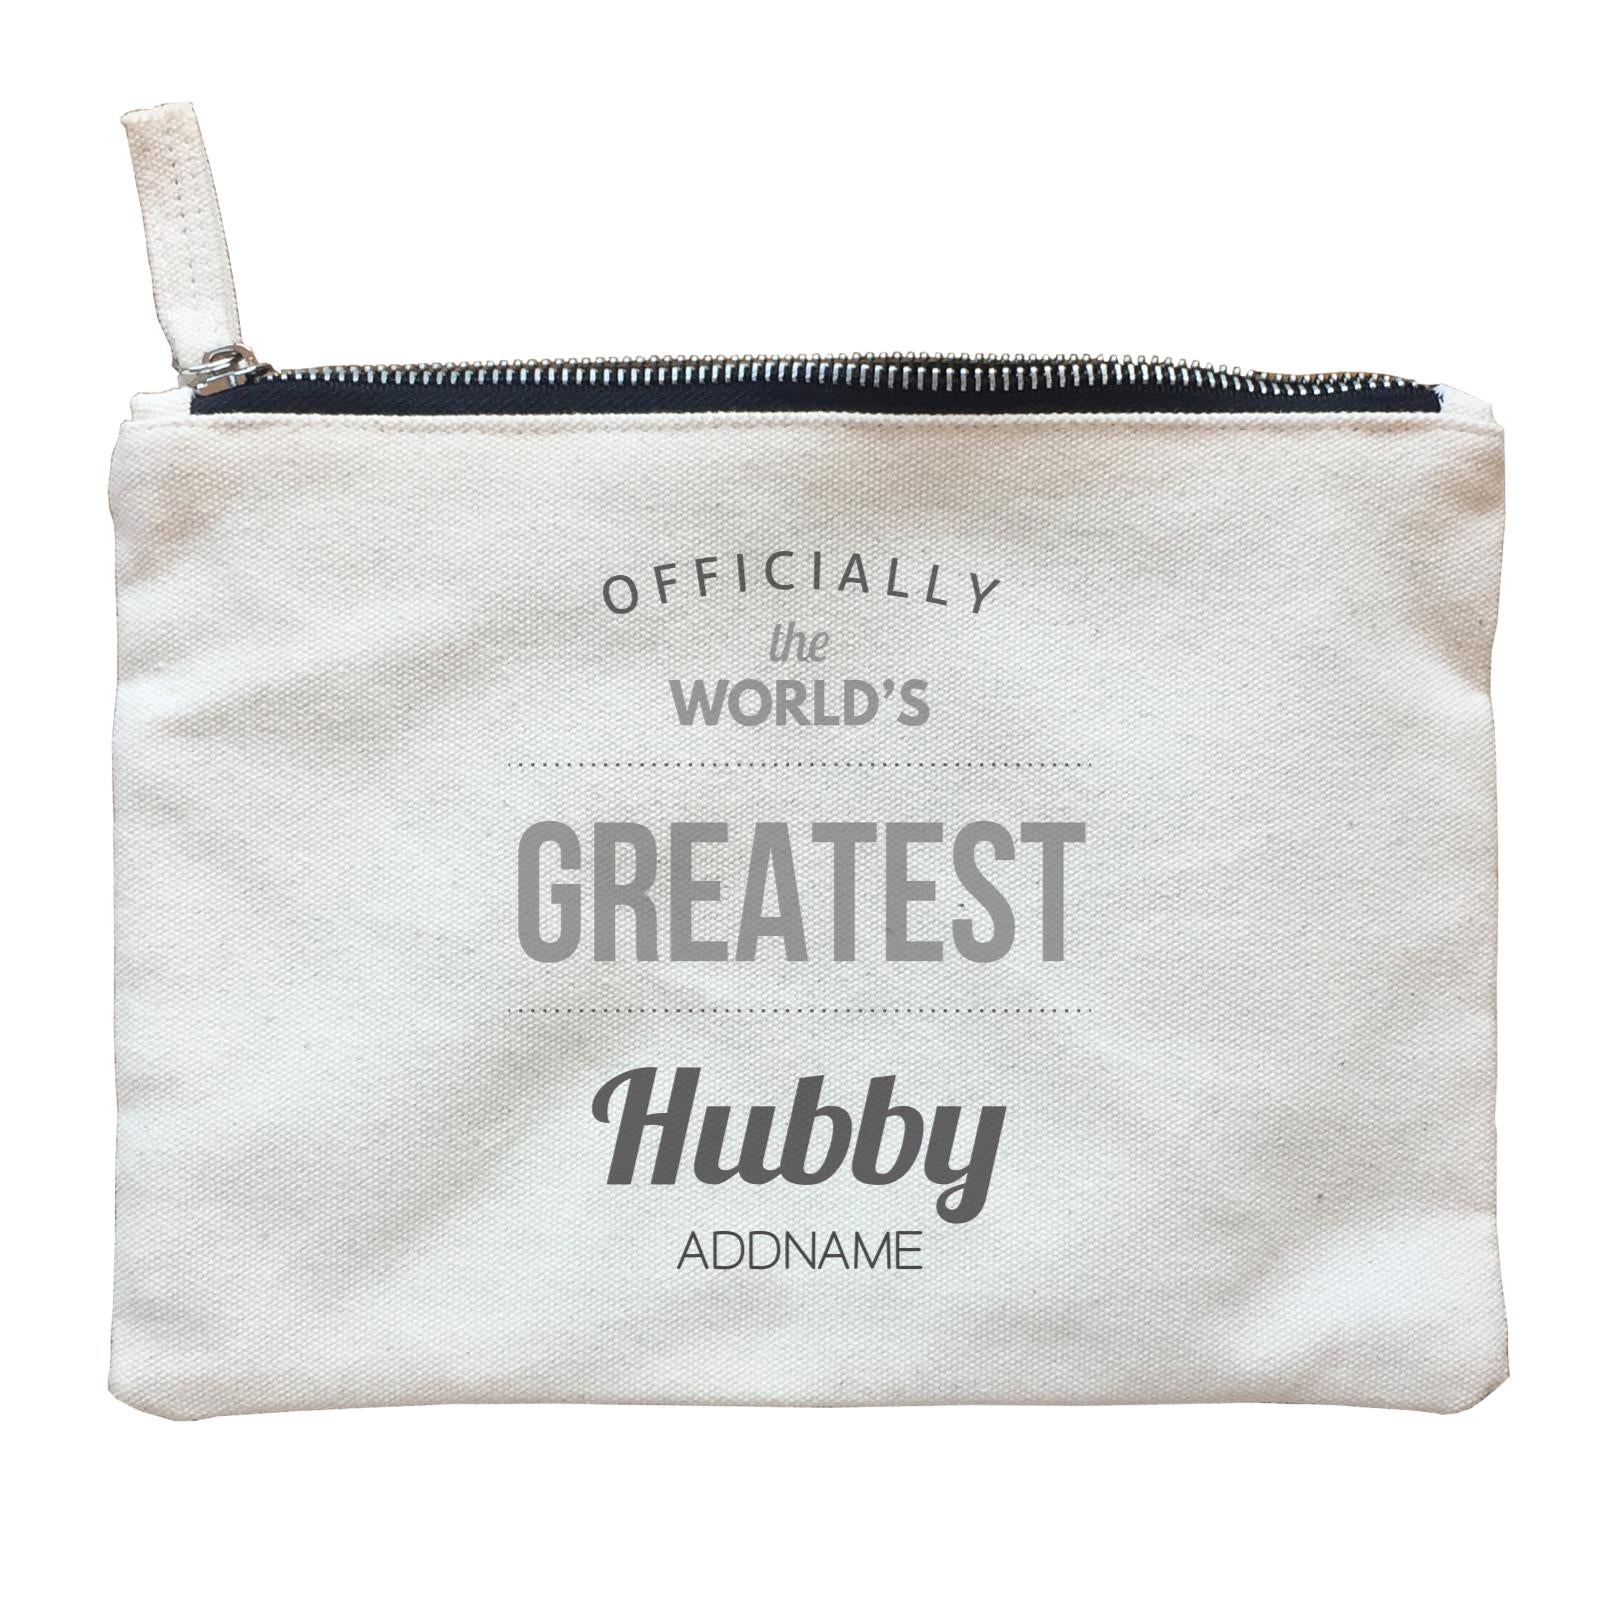 Husband and Wife Officially The World's Geatest Hubby Addname Zipper Pouch